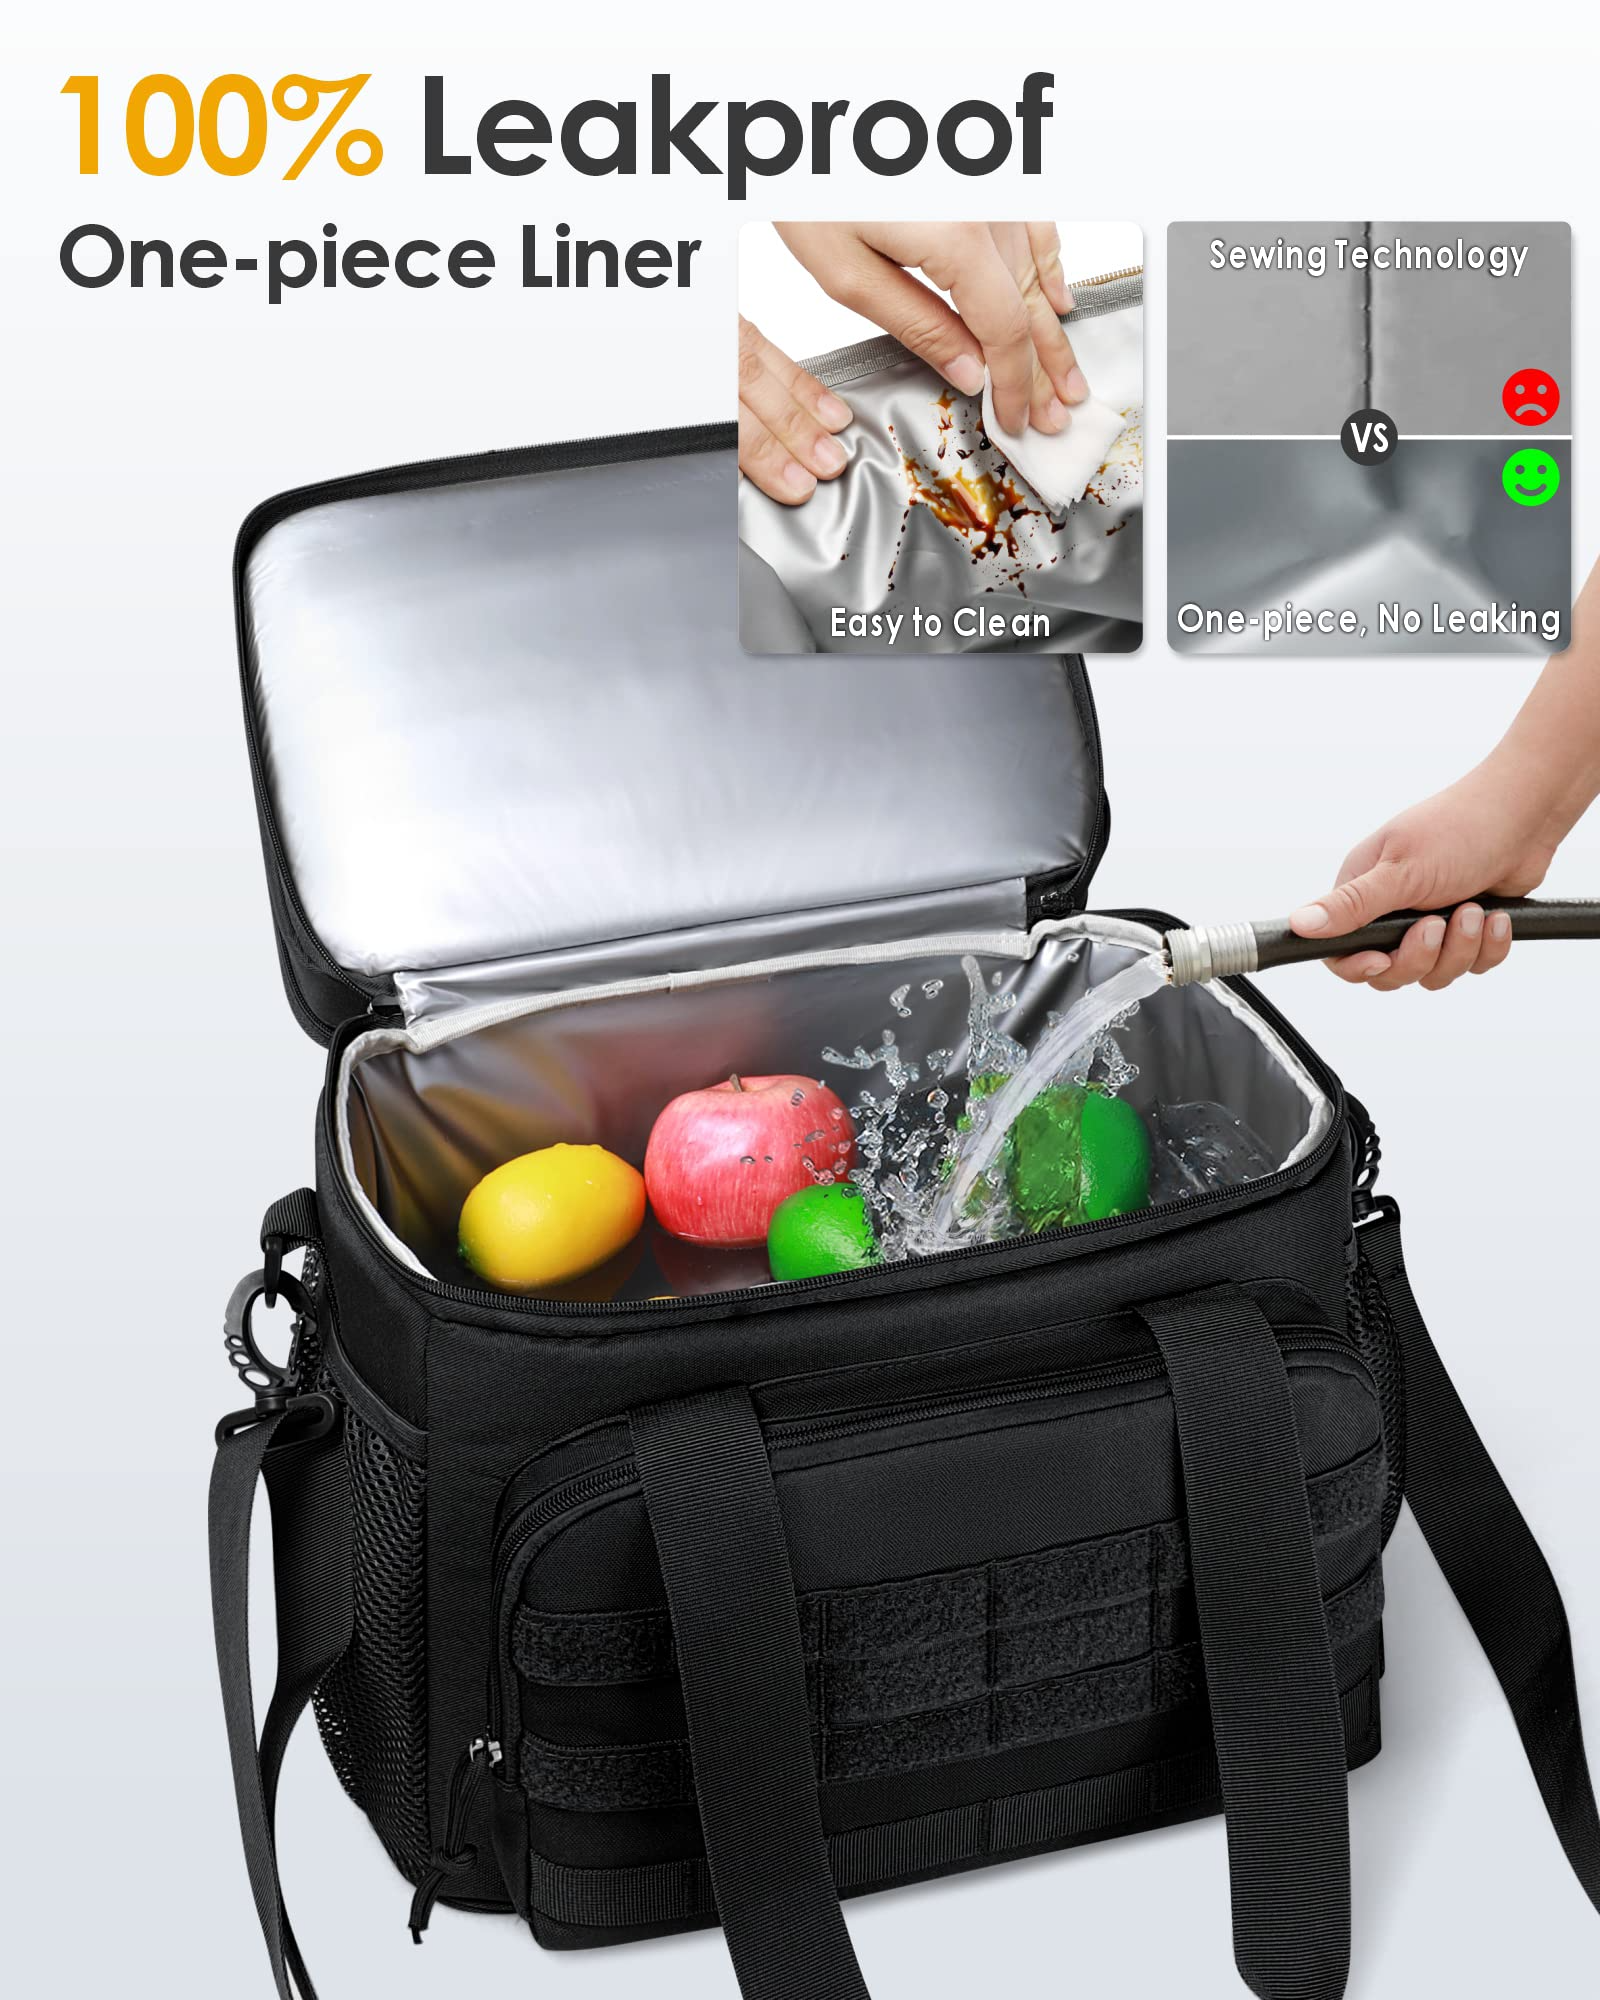 Insulated Lunch Bag, 17L Expandable Double Deck Lunch Tote Bag for